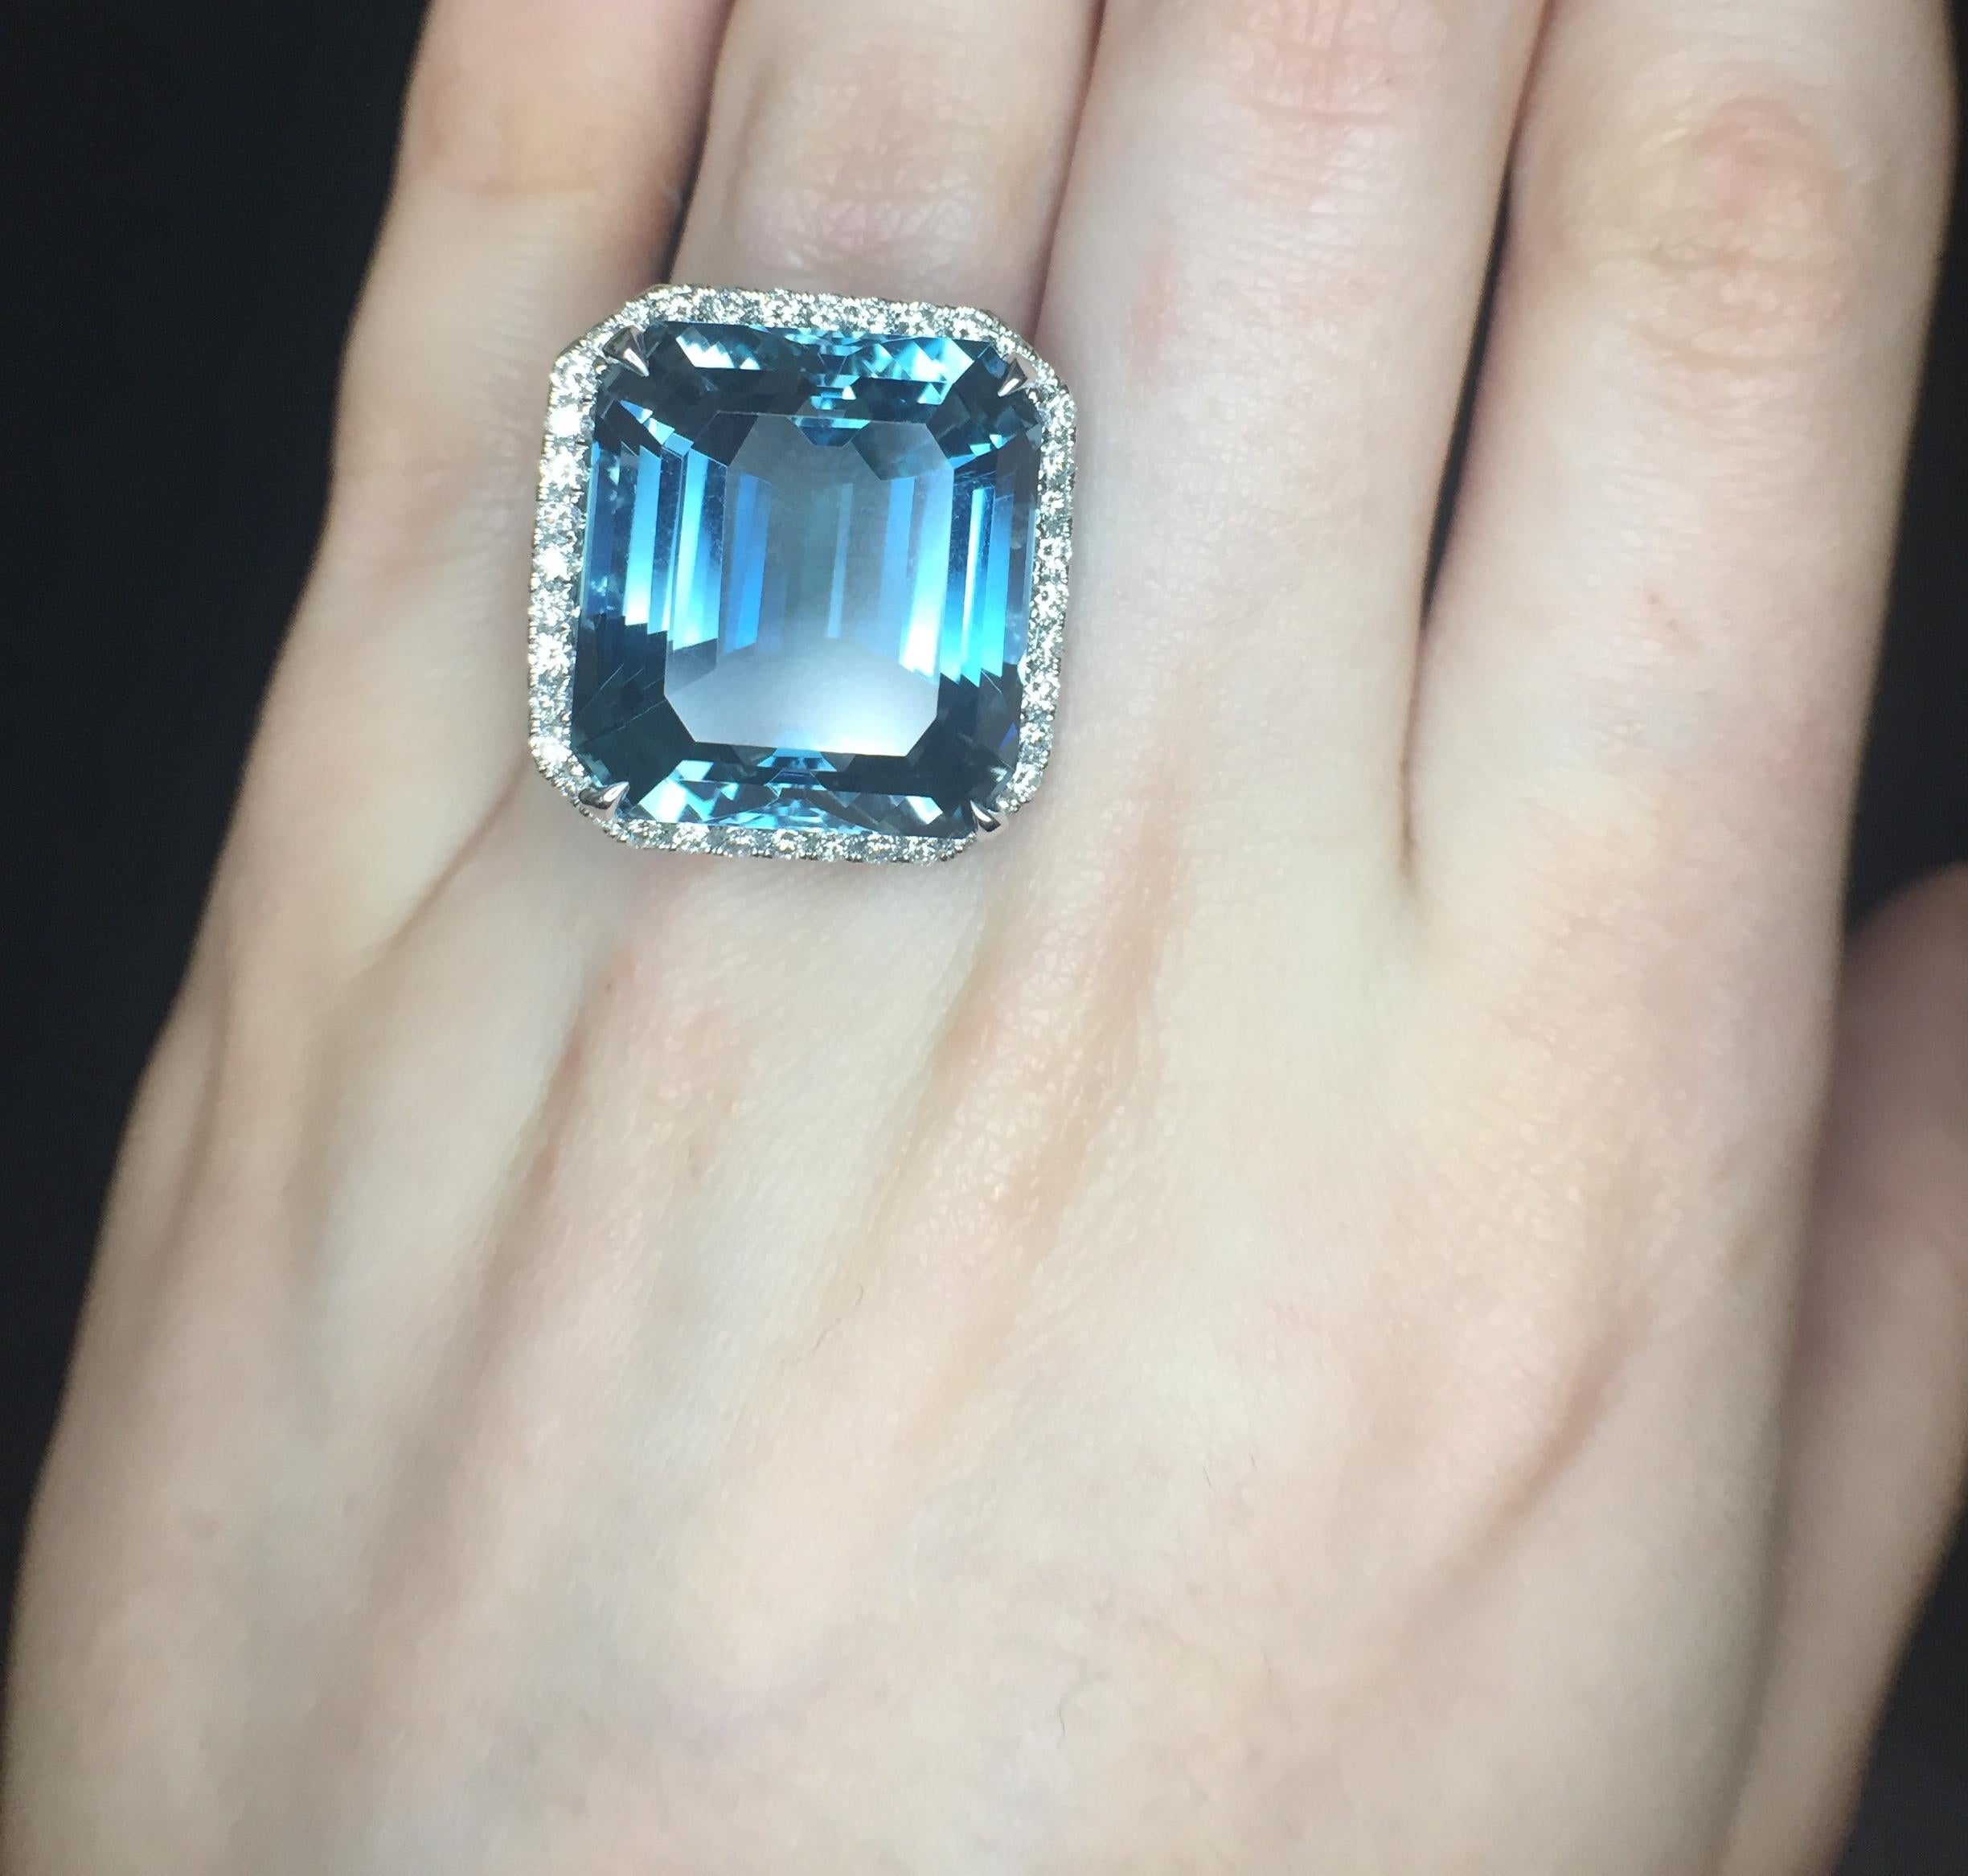 27.30ct Aquamarine (GIA report) emerald cut, very fine Santa Maria color, set in an 18k white gold cocktail ring with 2.50 total diamond weight. Ring size 6.5, can be sized larger or smaller upon request.
Aquamarine measurements: